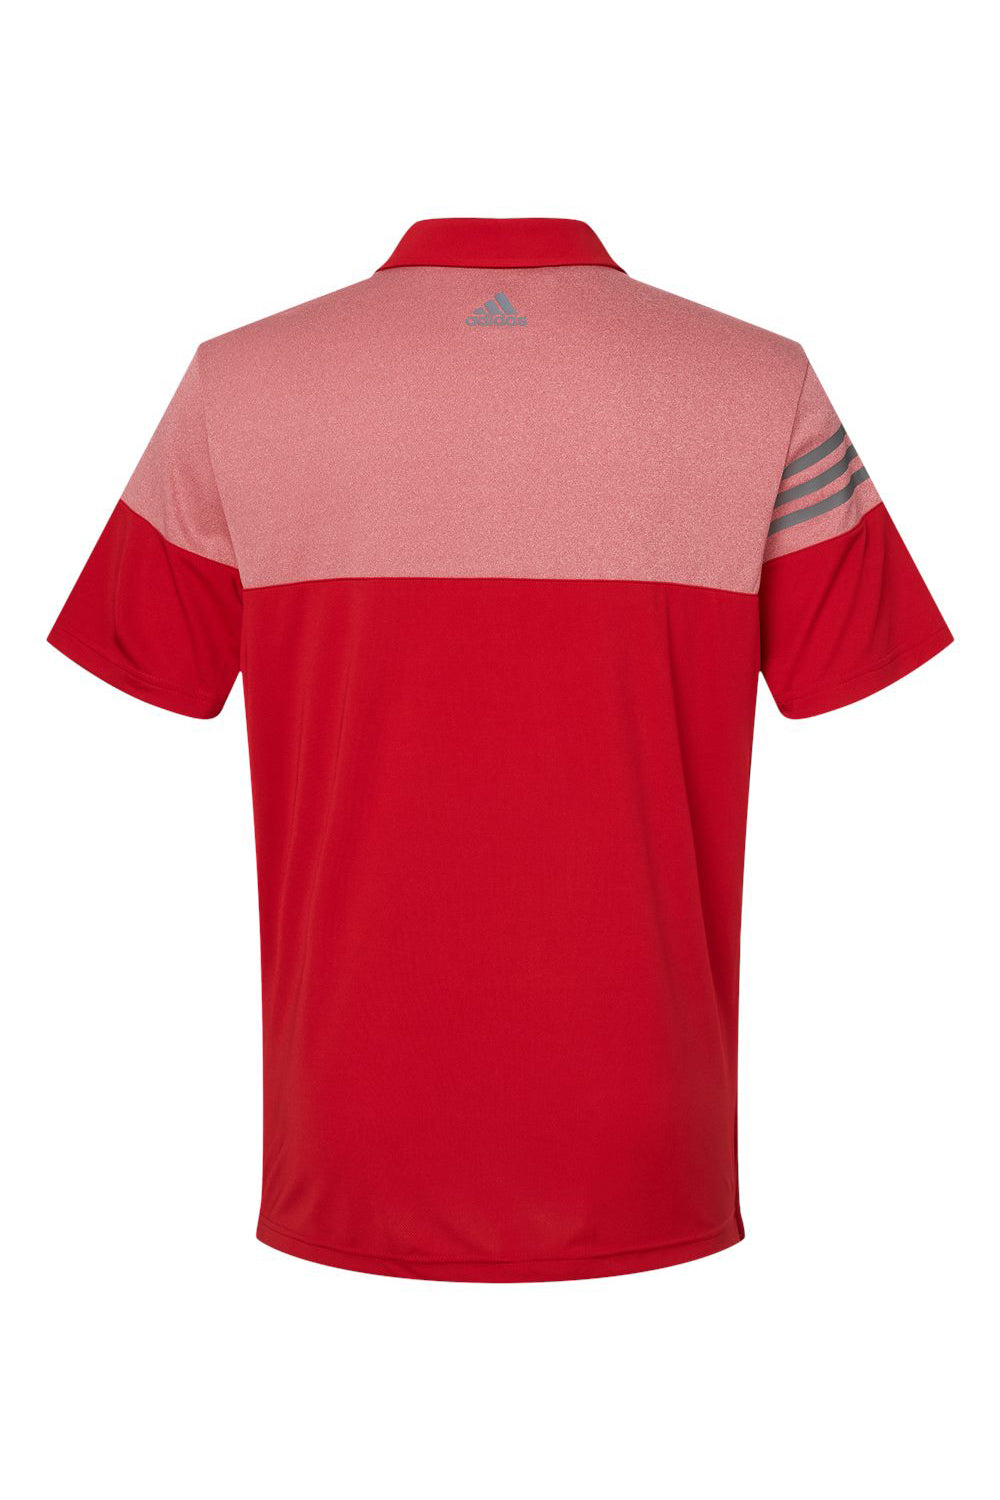 Adidas A213 Mens 3 Stripes Heathered Colorblock Short Sleeve Polo Shirt Power Red Flat Back